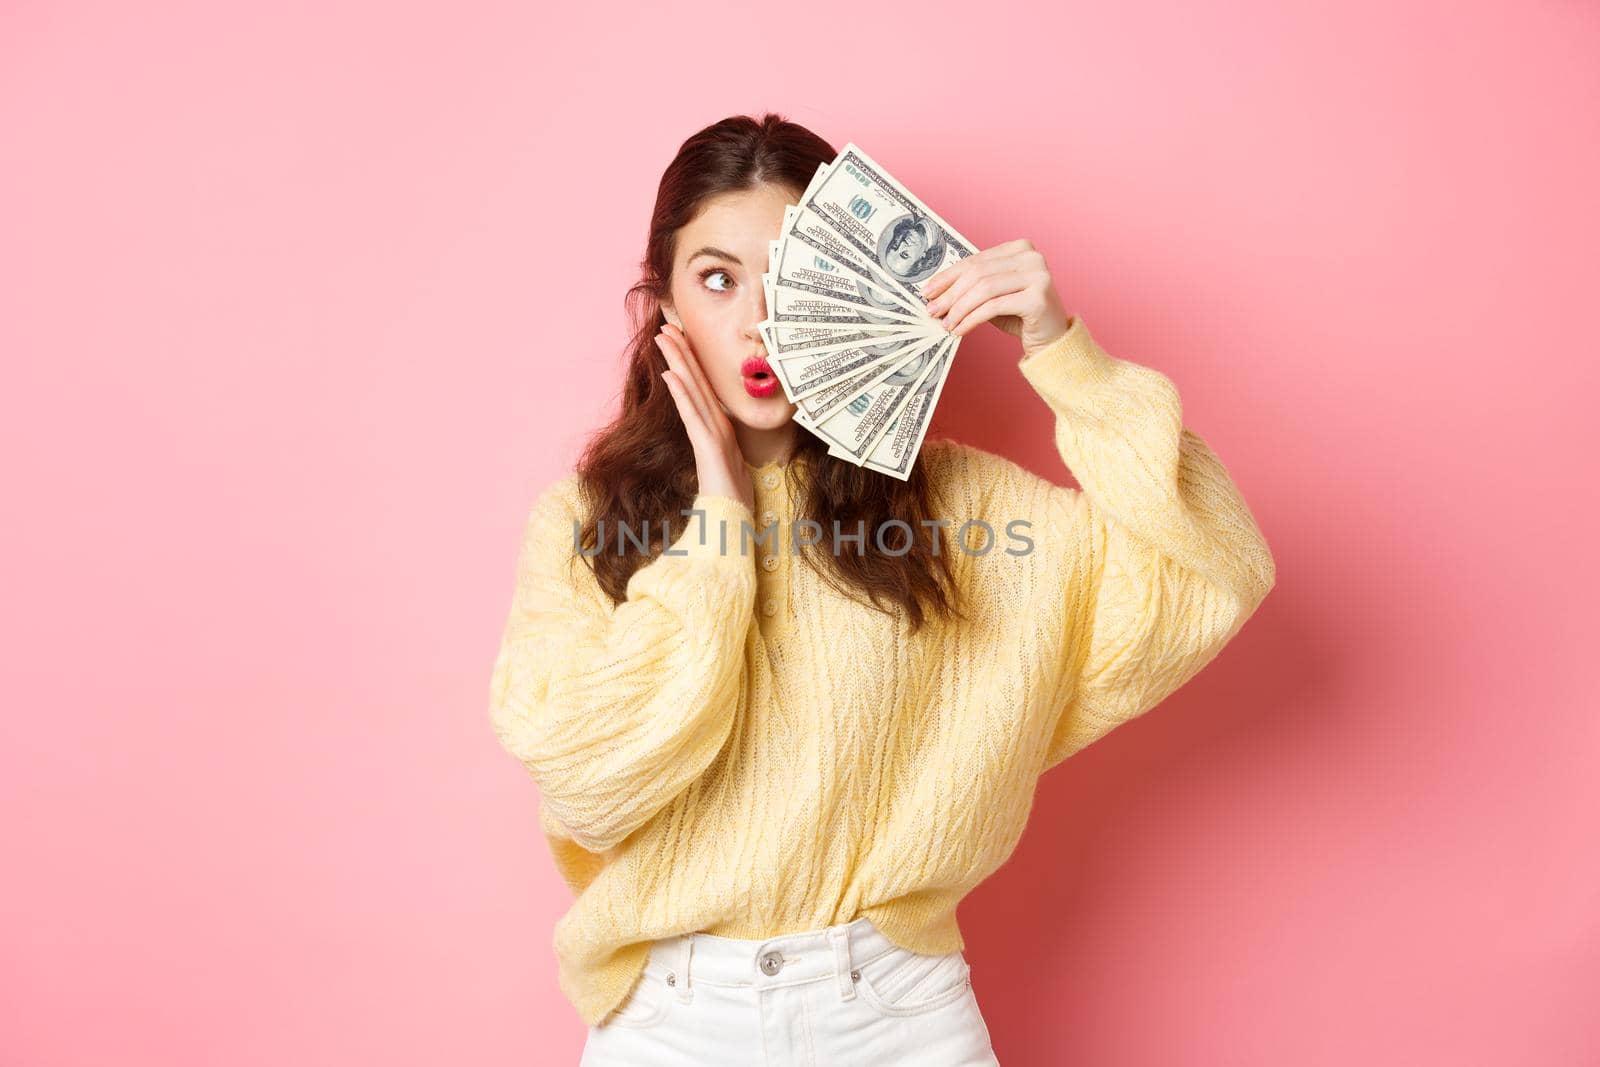 Coquettish young lady pucker lips, making silly face, covering half of it with money dollars, standing over pink background. Copy space